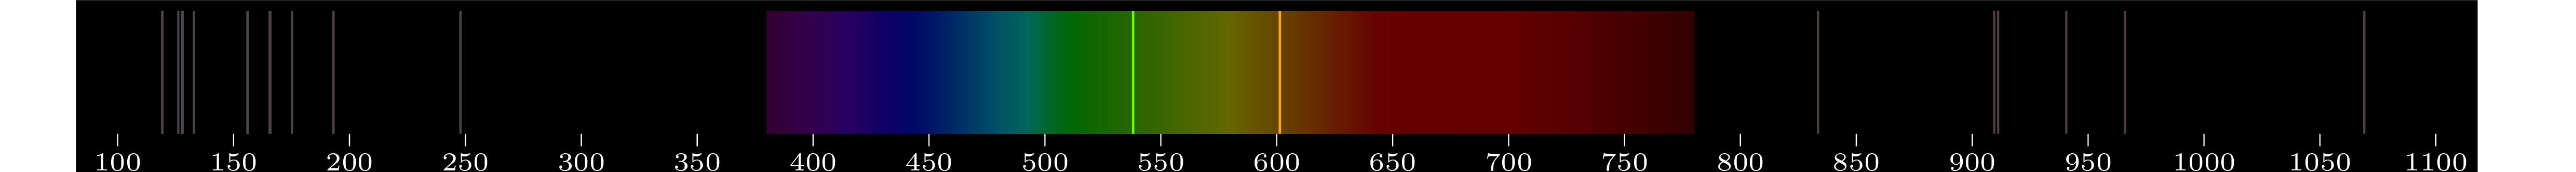 emmision spectra of element C